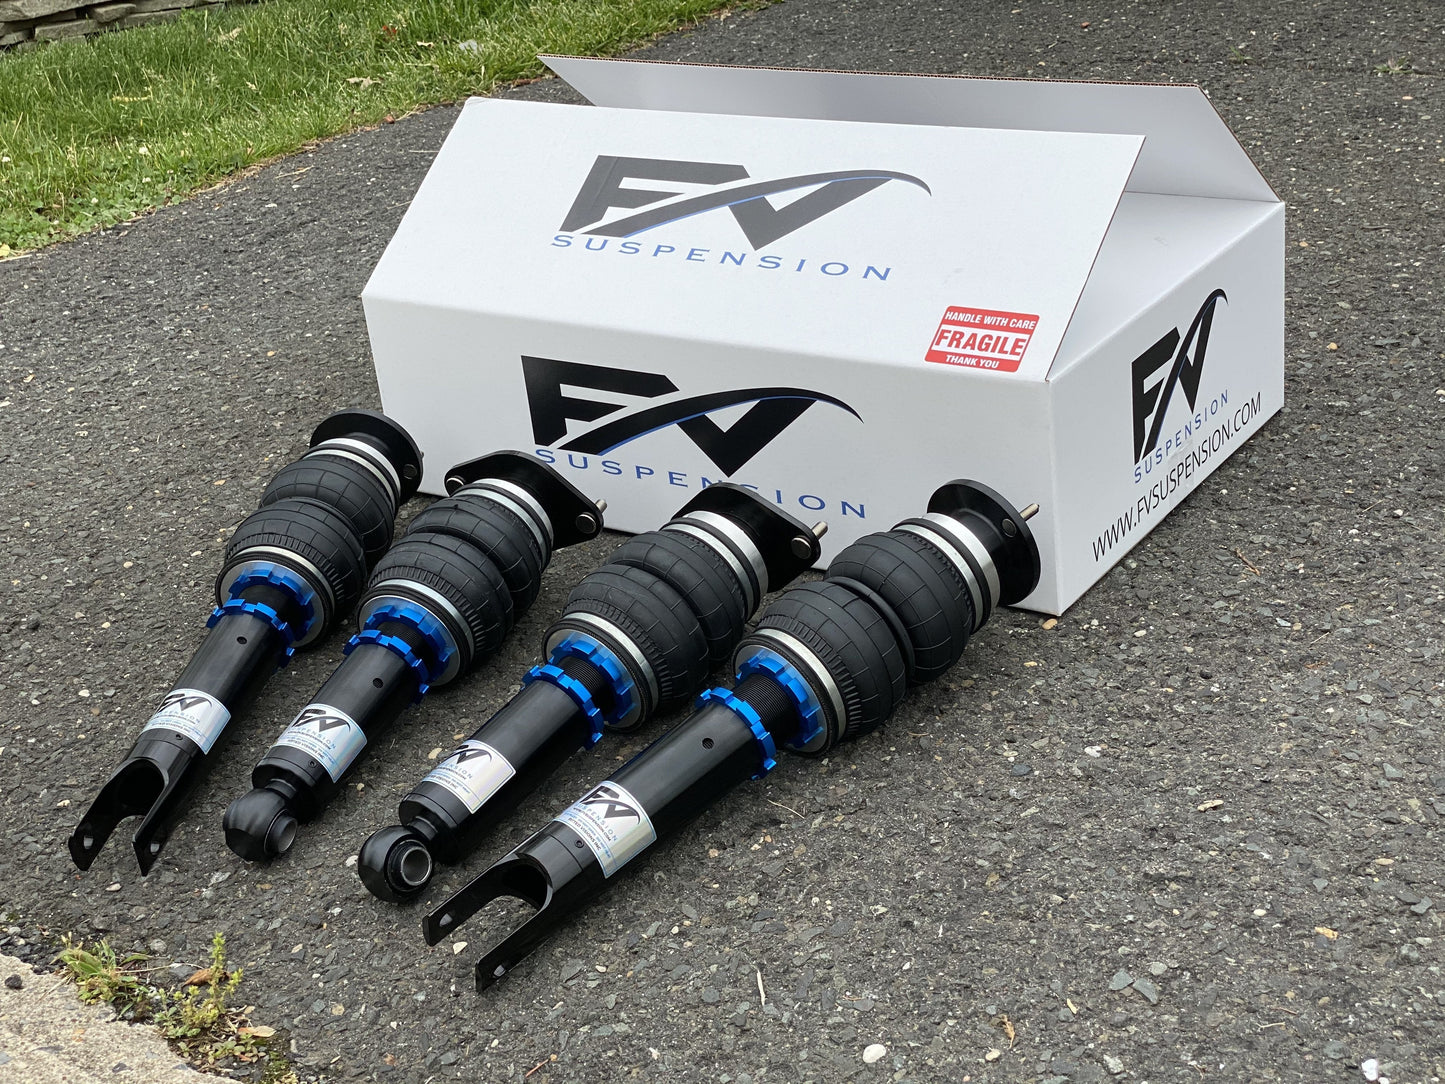 FV Suspension 3H Tier 3 Complete Air Ride kit for 06-11 Mercedes-Benz CLS-Class W219 - Full Kit